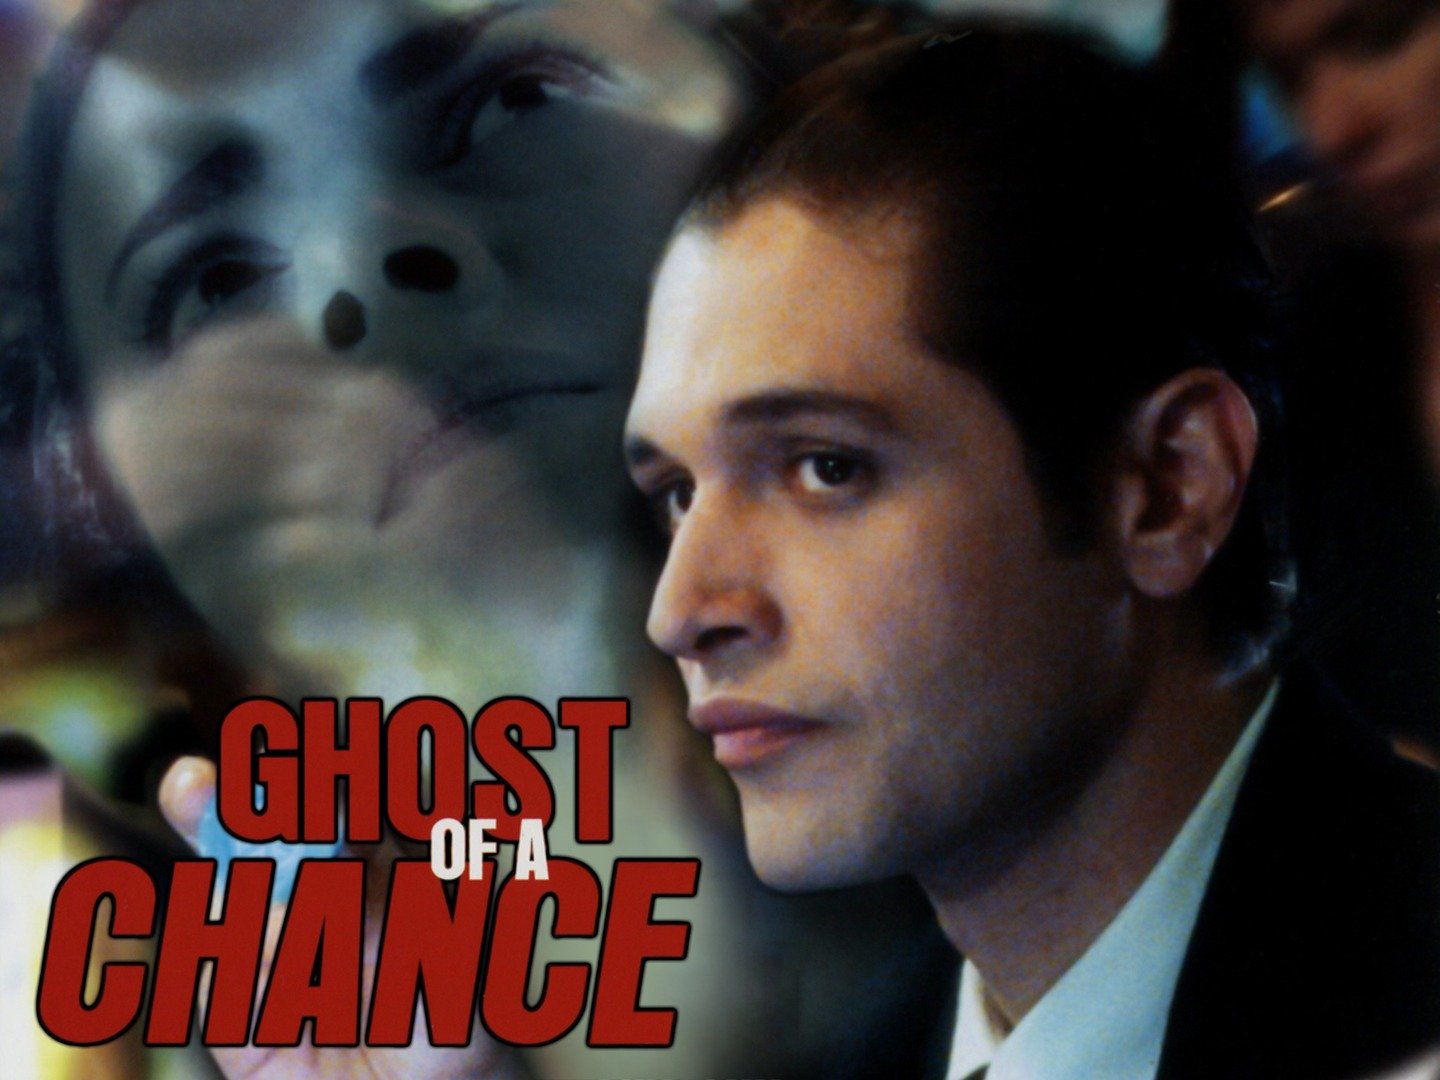 cast of a ghost of a chance 2011